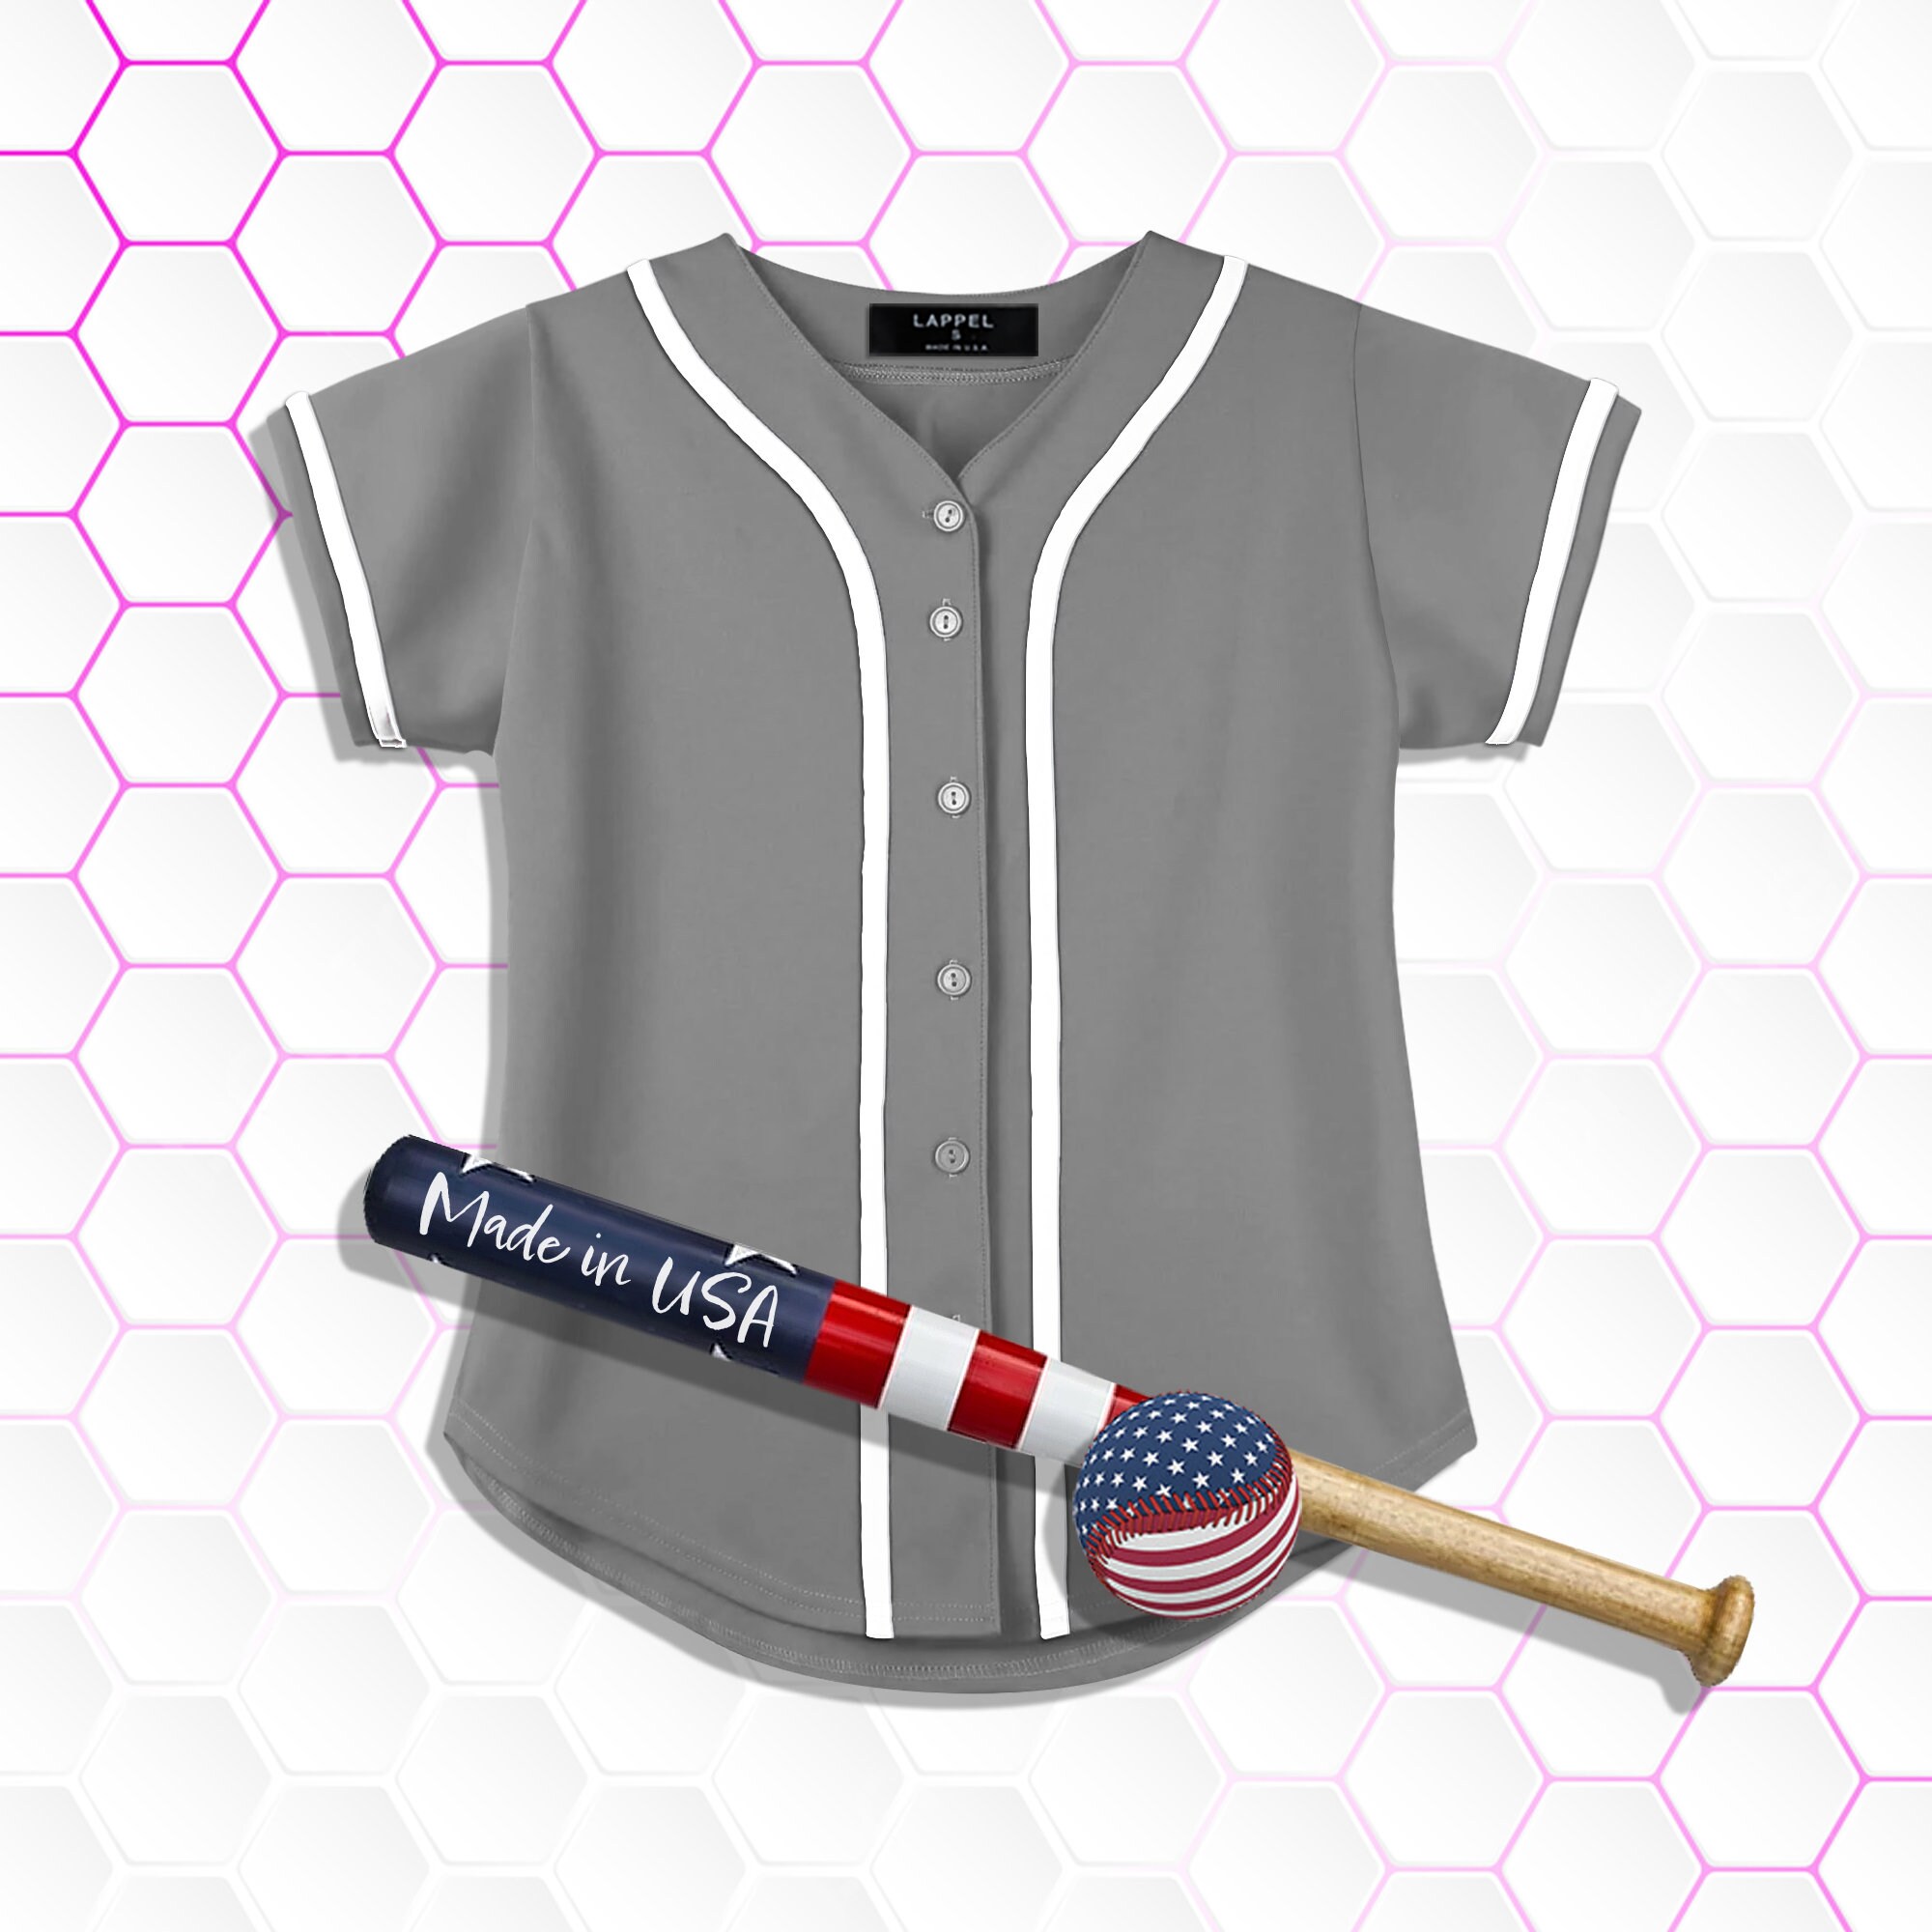 Discover Women's Baseball Button Down Jersey College Sports Team Uniforms Size S to 2XL Short Sleeve Athletic Sports Tee Shirts Made in USA